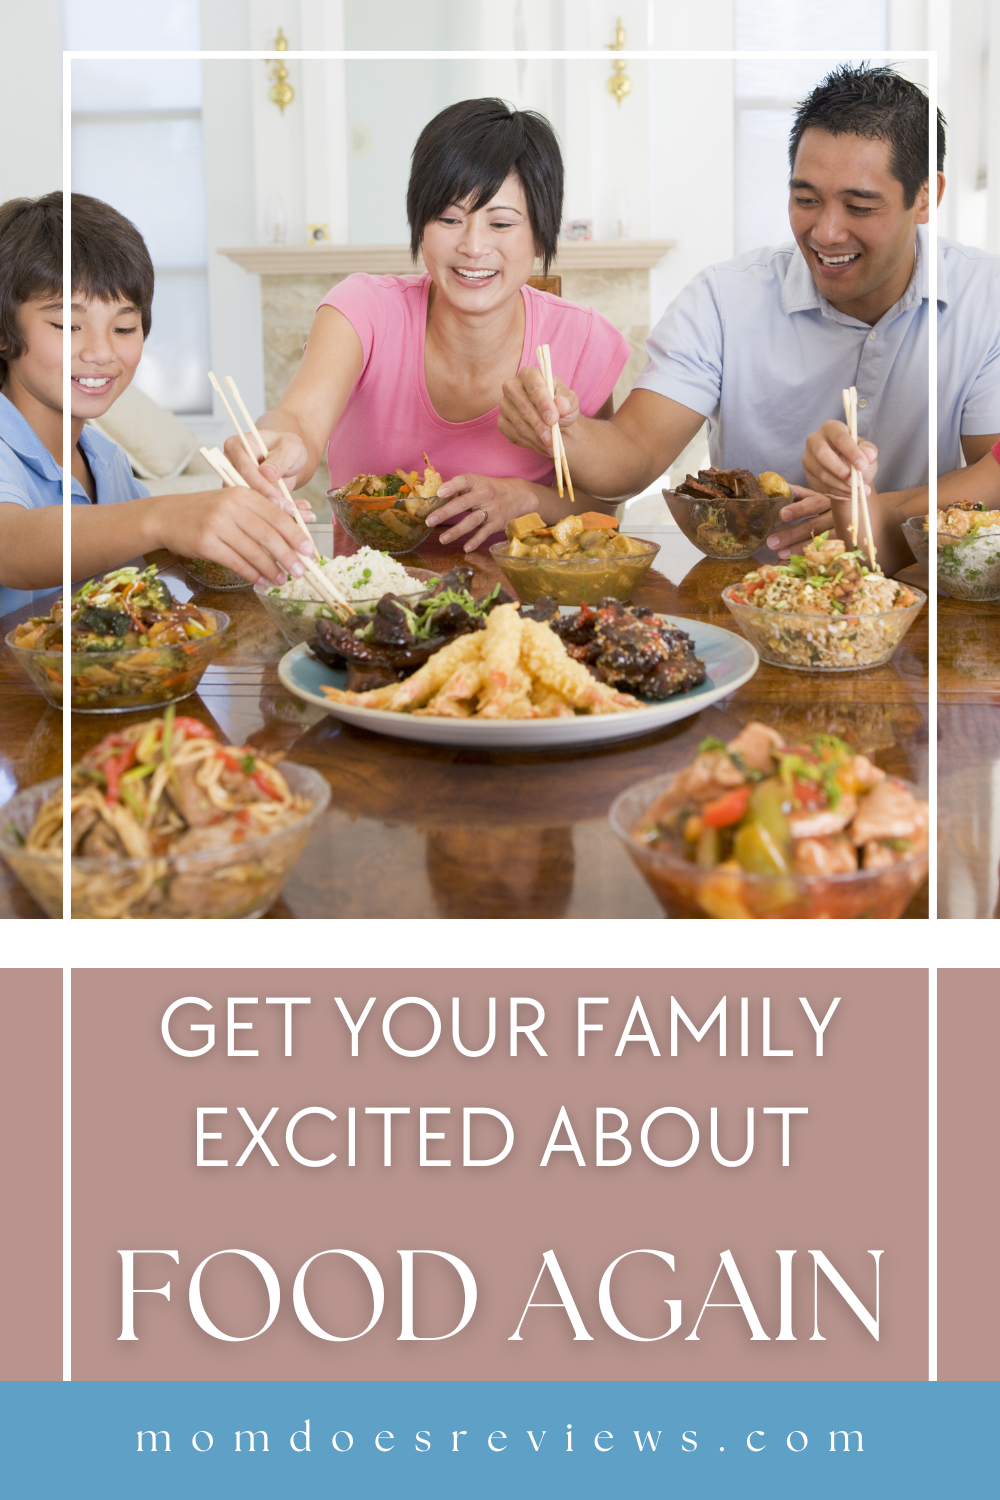 Getting Your Family Excited About Food Again